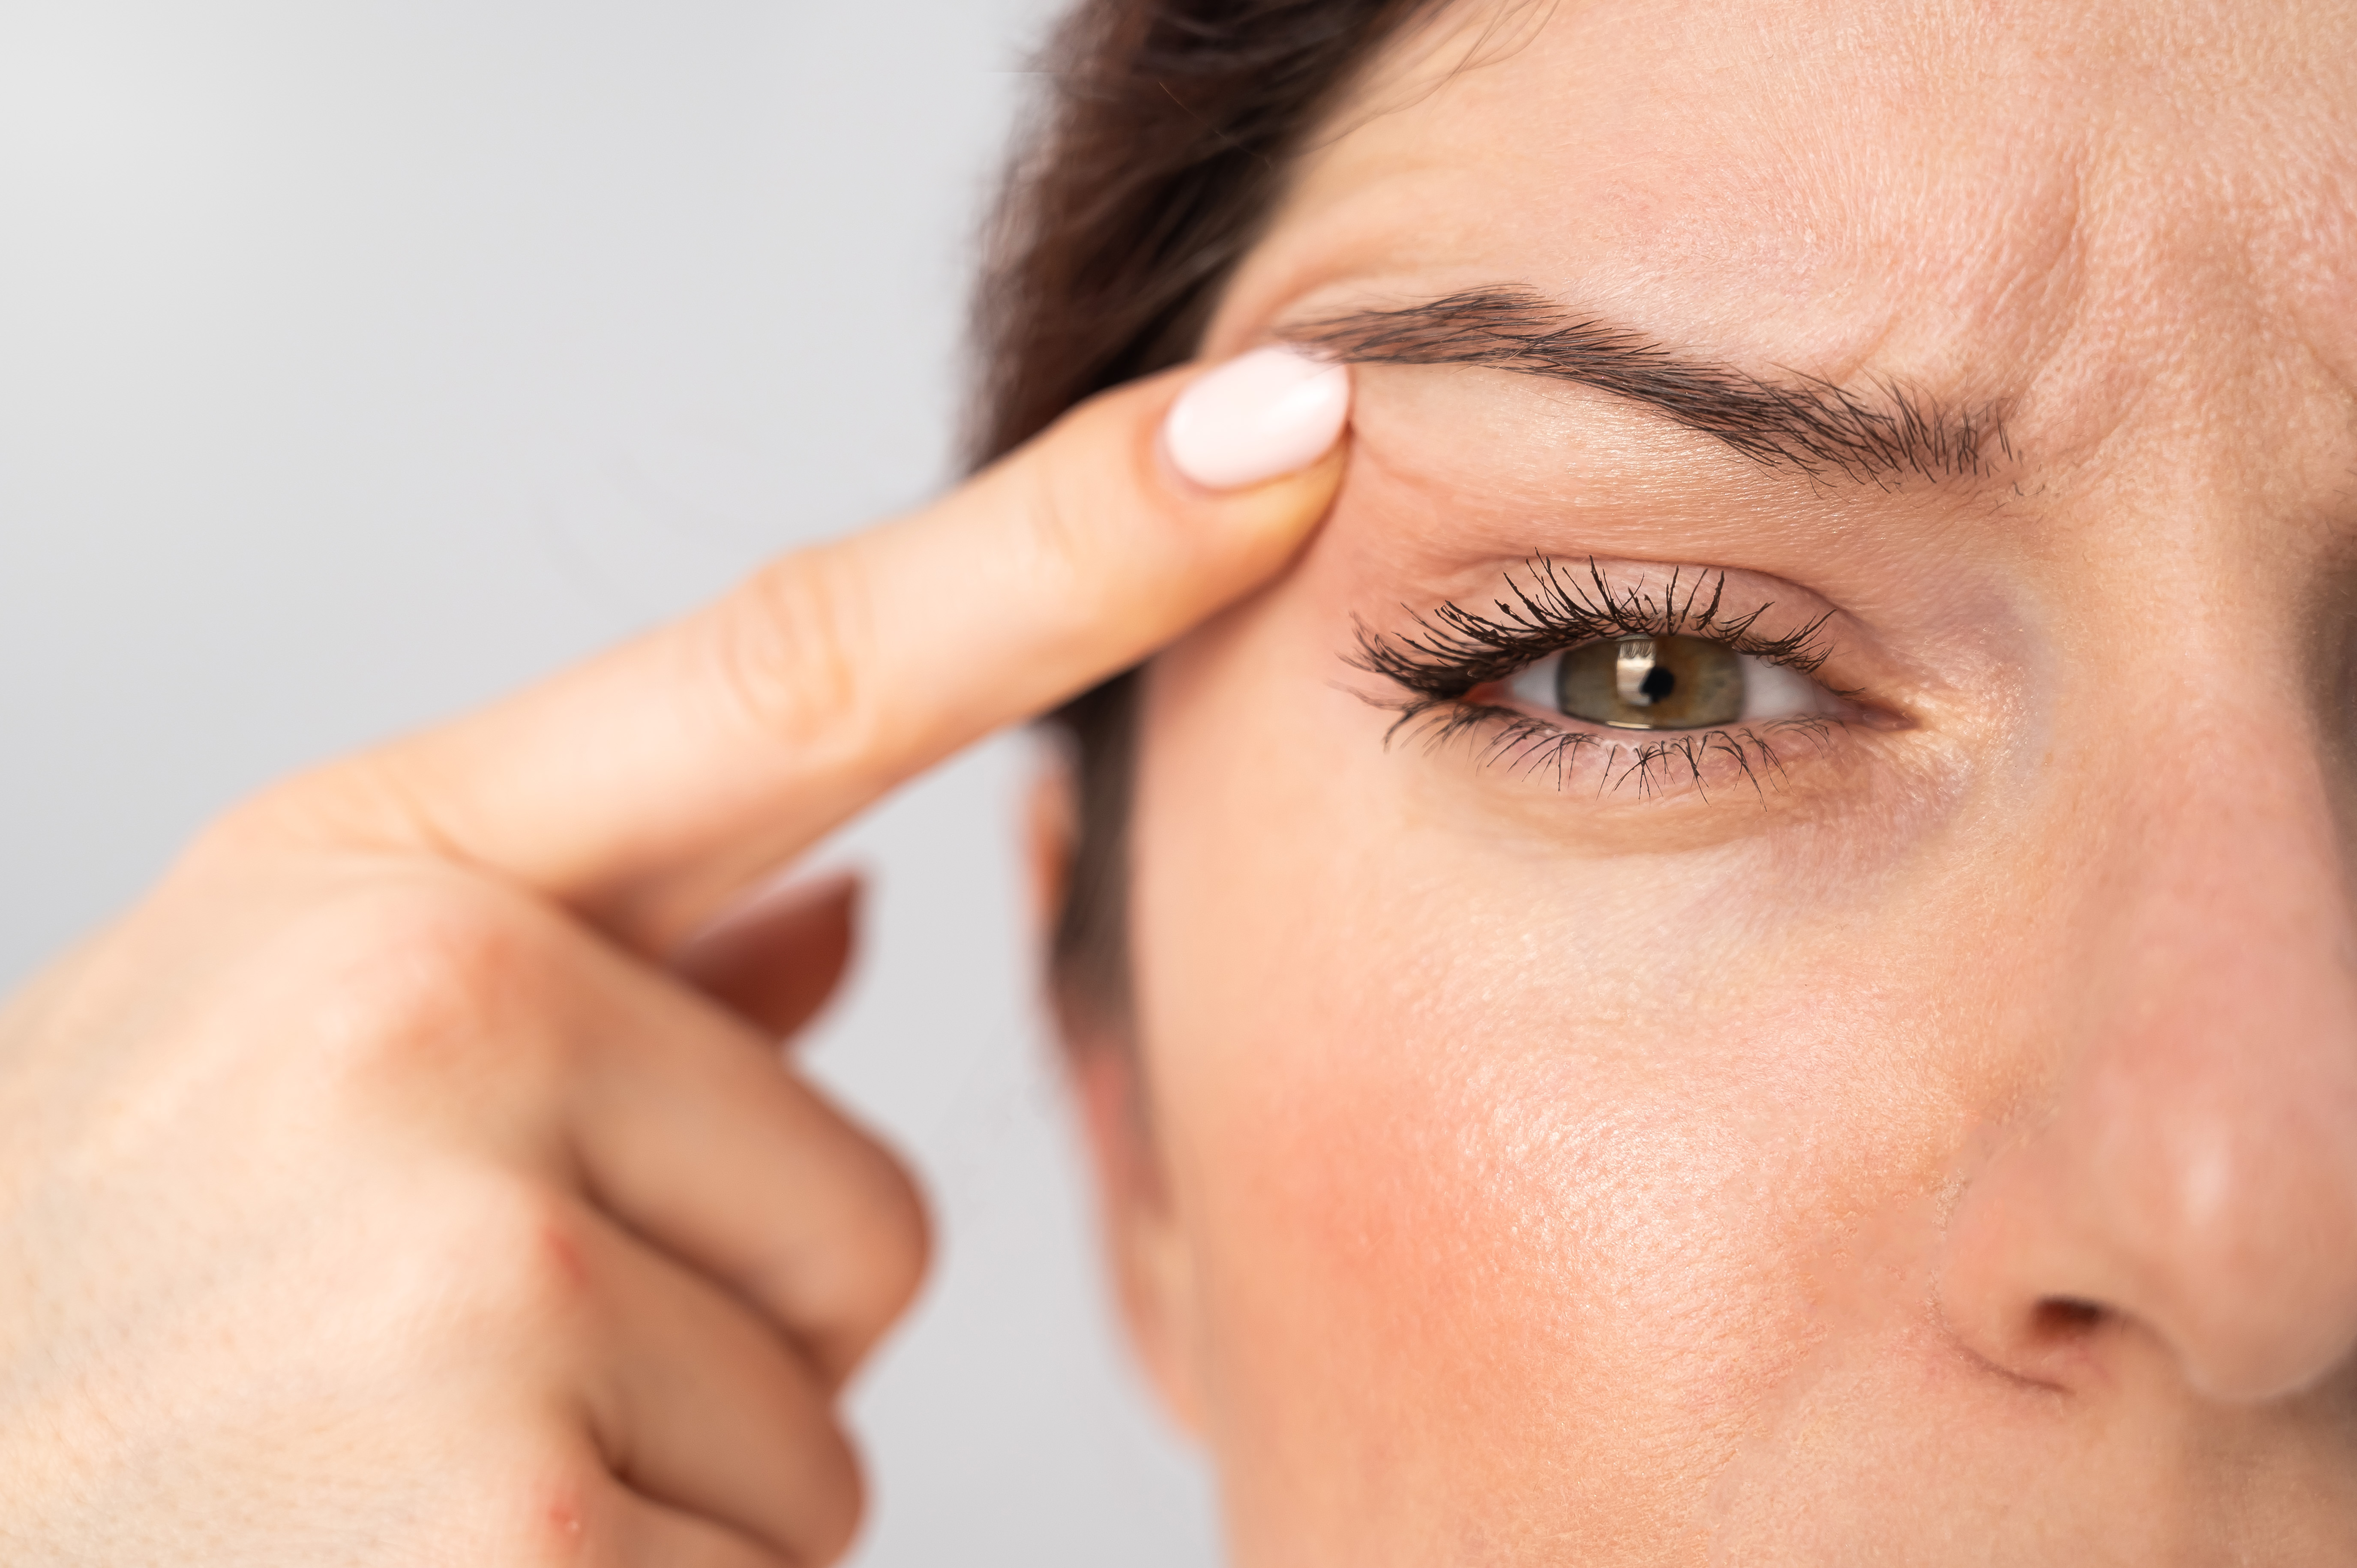 Woman examining face due to eyelid twitching